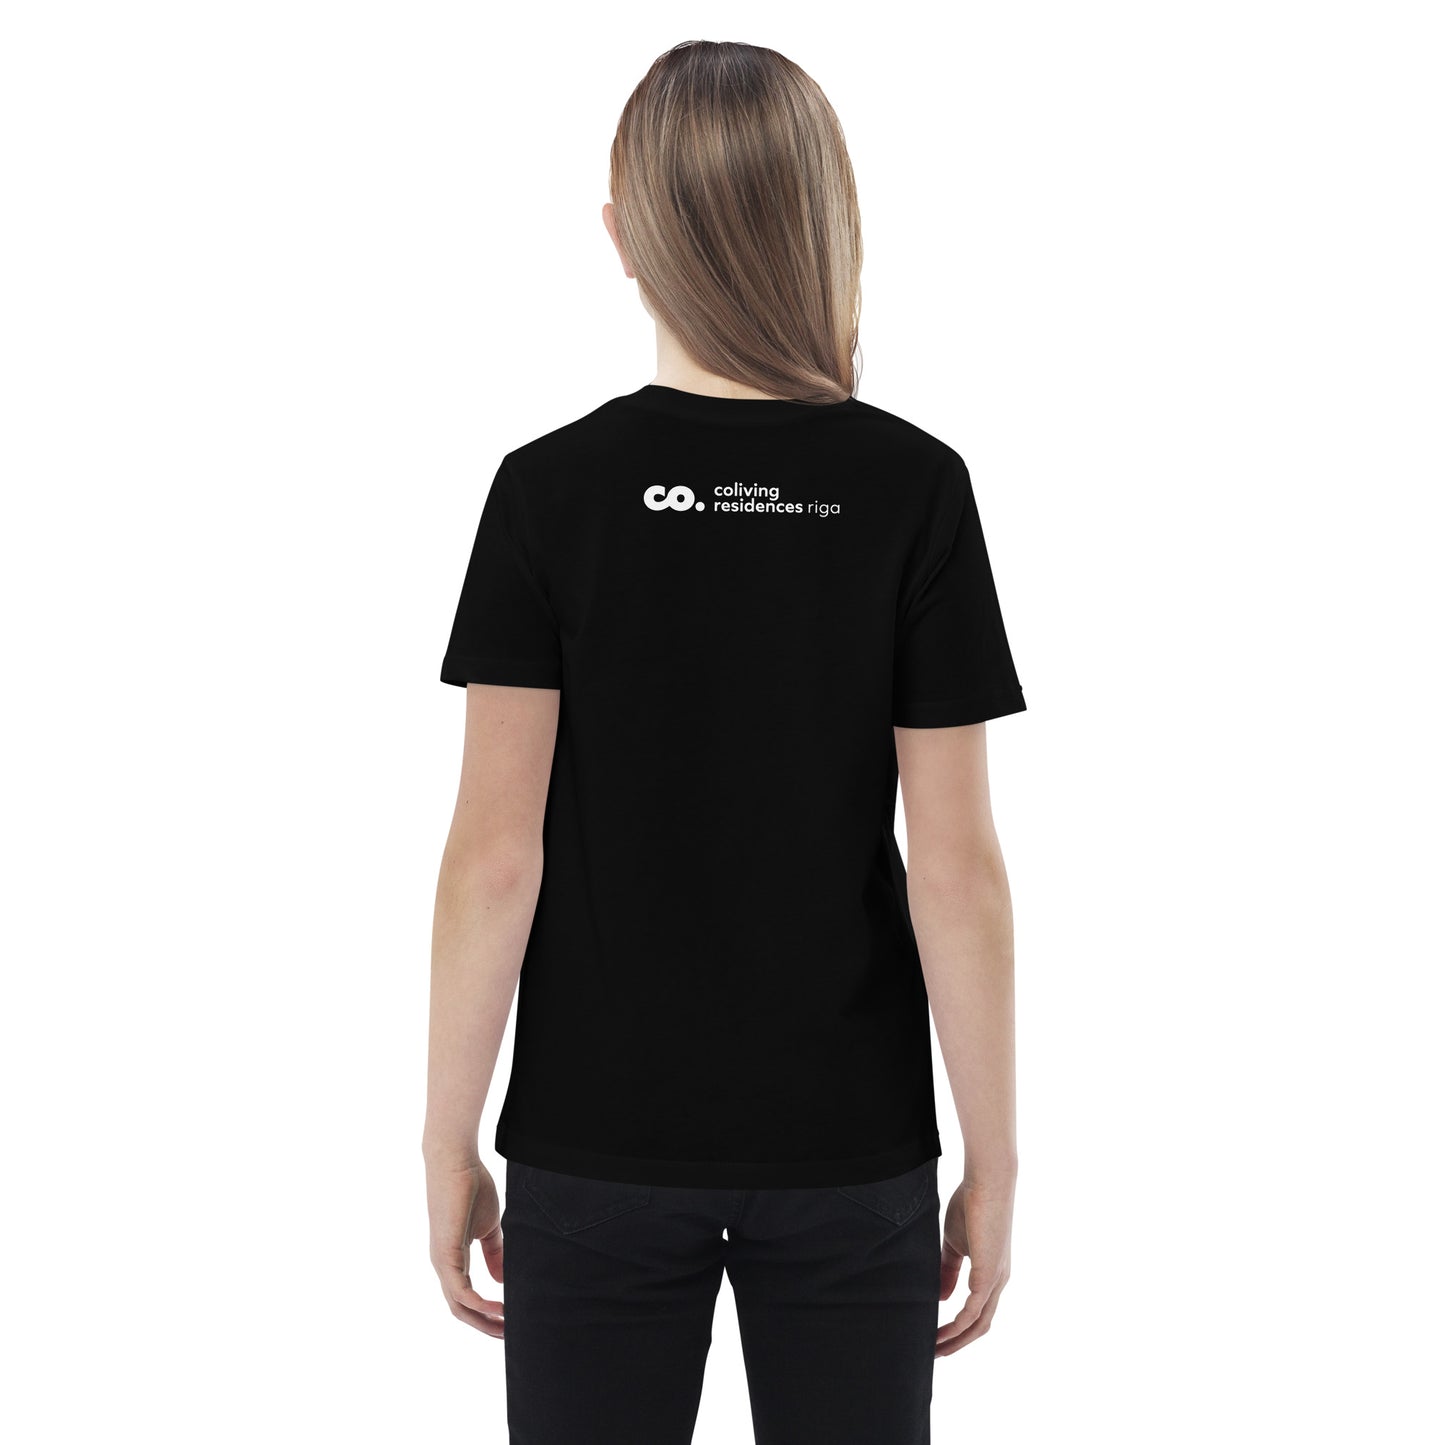 Back view of a teenager girl wearing a black t-shirt featuring Coliving Residences Logo